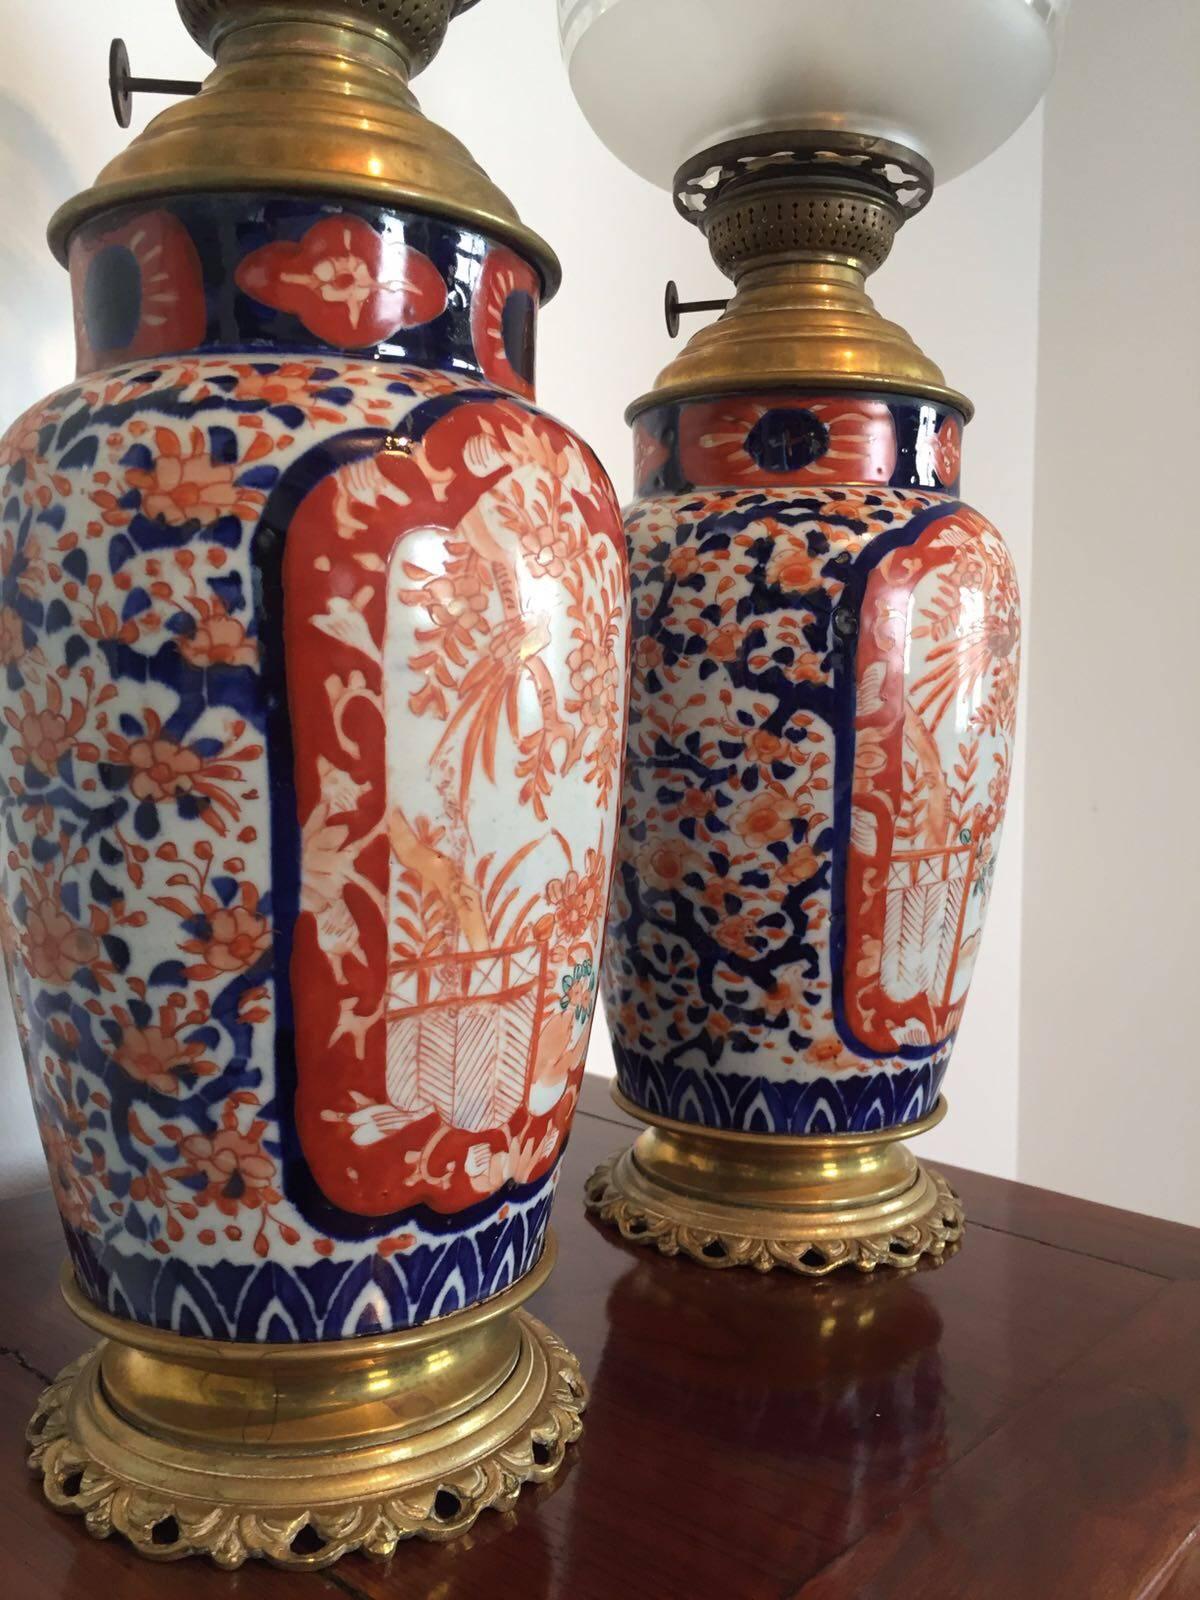 These antique Japanese porcelain oil lamps were made during the Edo (Tokugawa) era, circa 1825.
Hand-painted Ko Imari decoration in bright blue and red.
Finished with brass base and torch.
All (glass) parts are still original and has no damage,